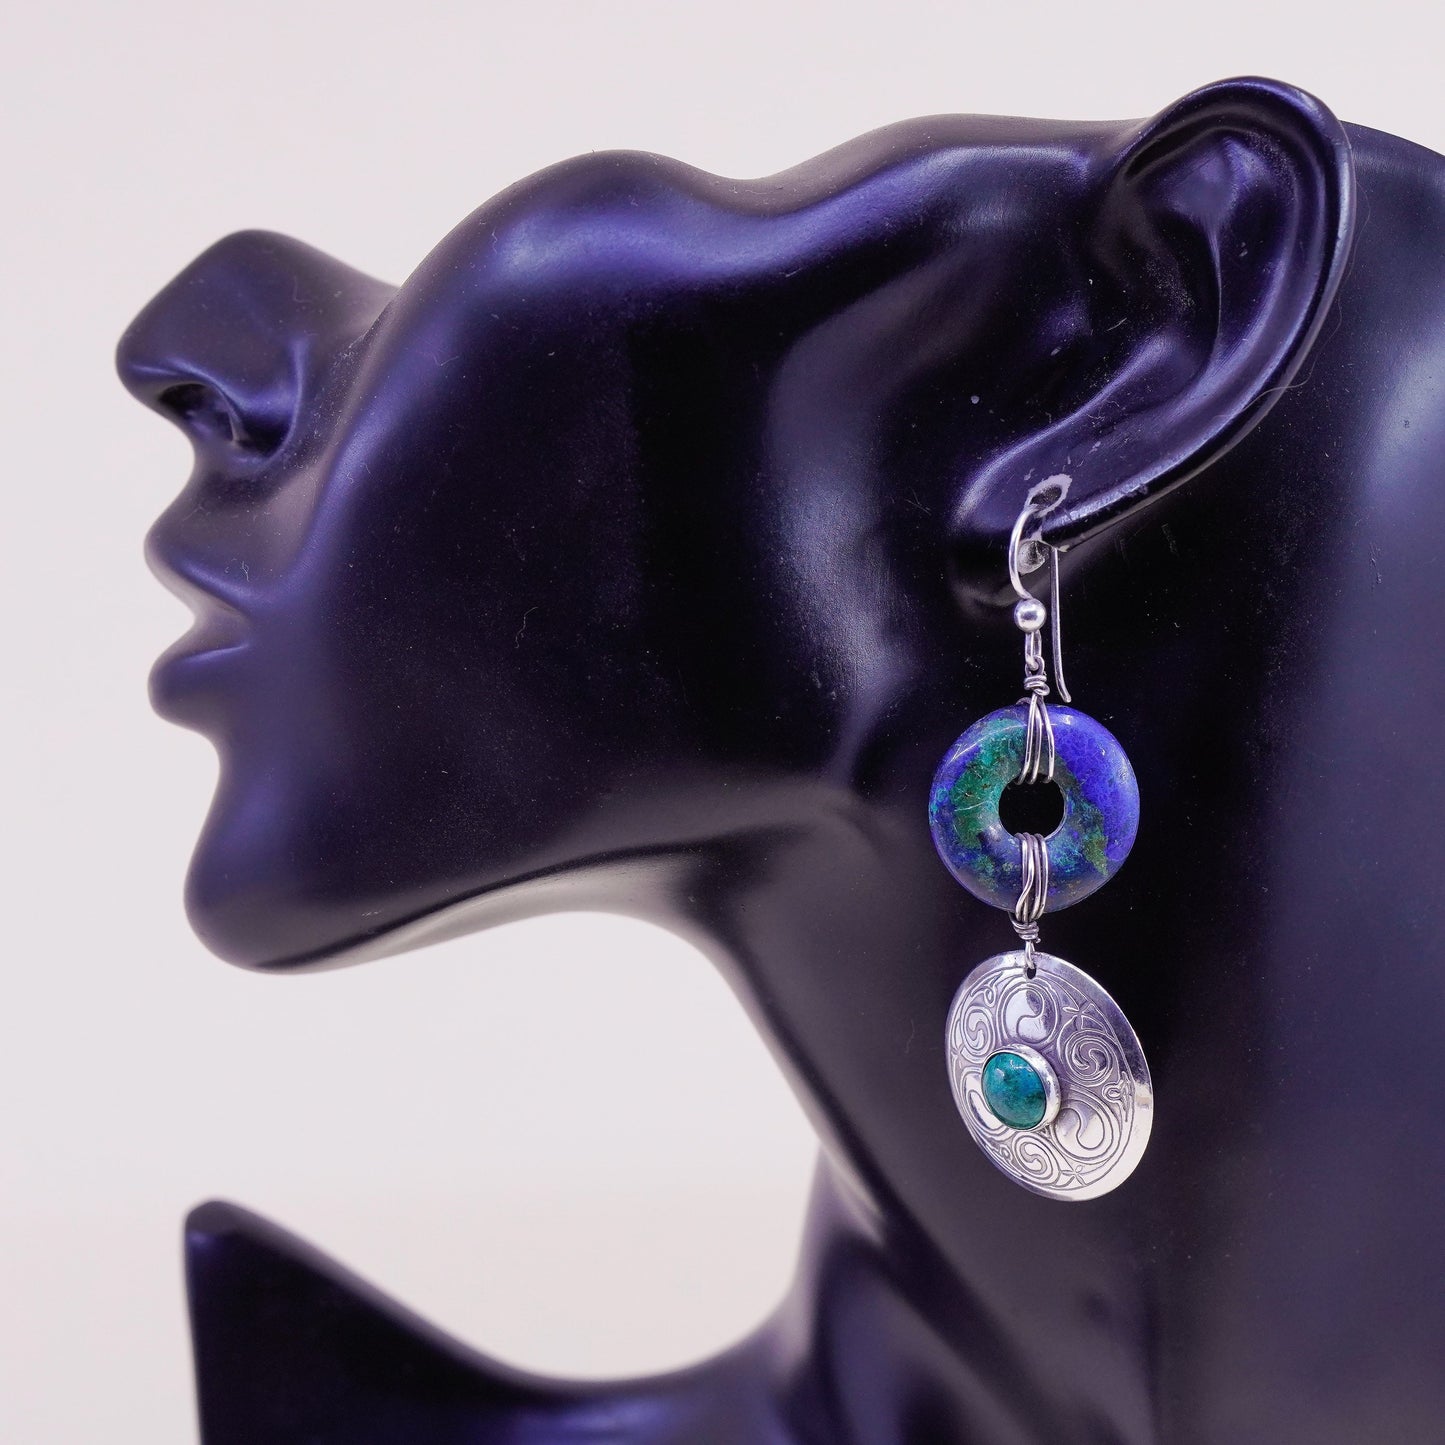 Vintage Sterling 925 silver handmade earrings with azurite and circle dangles